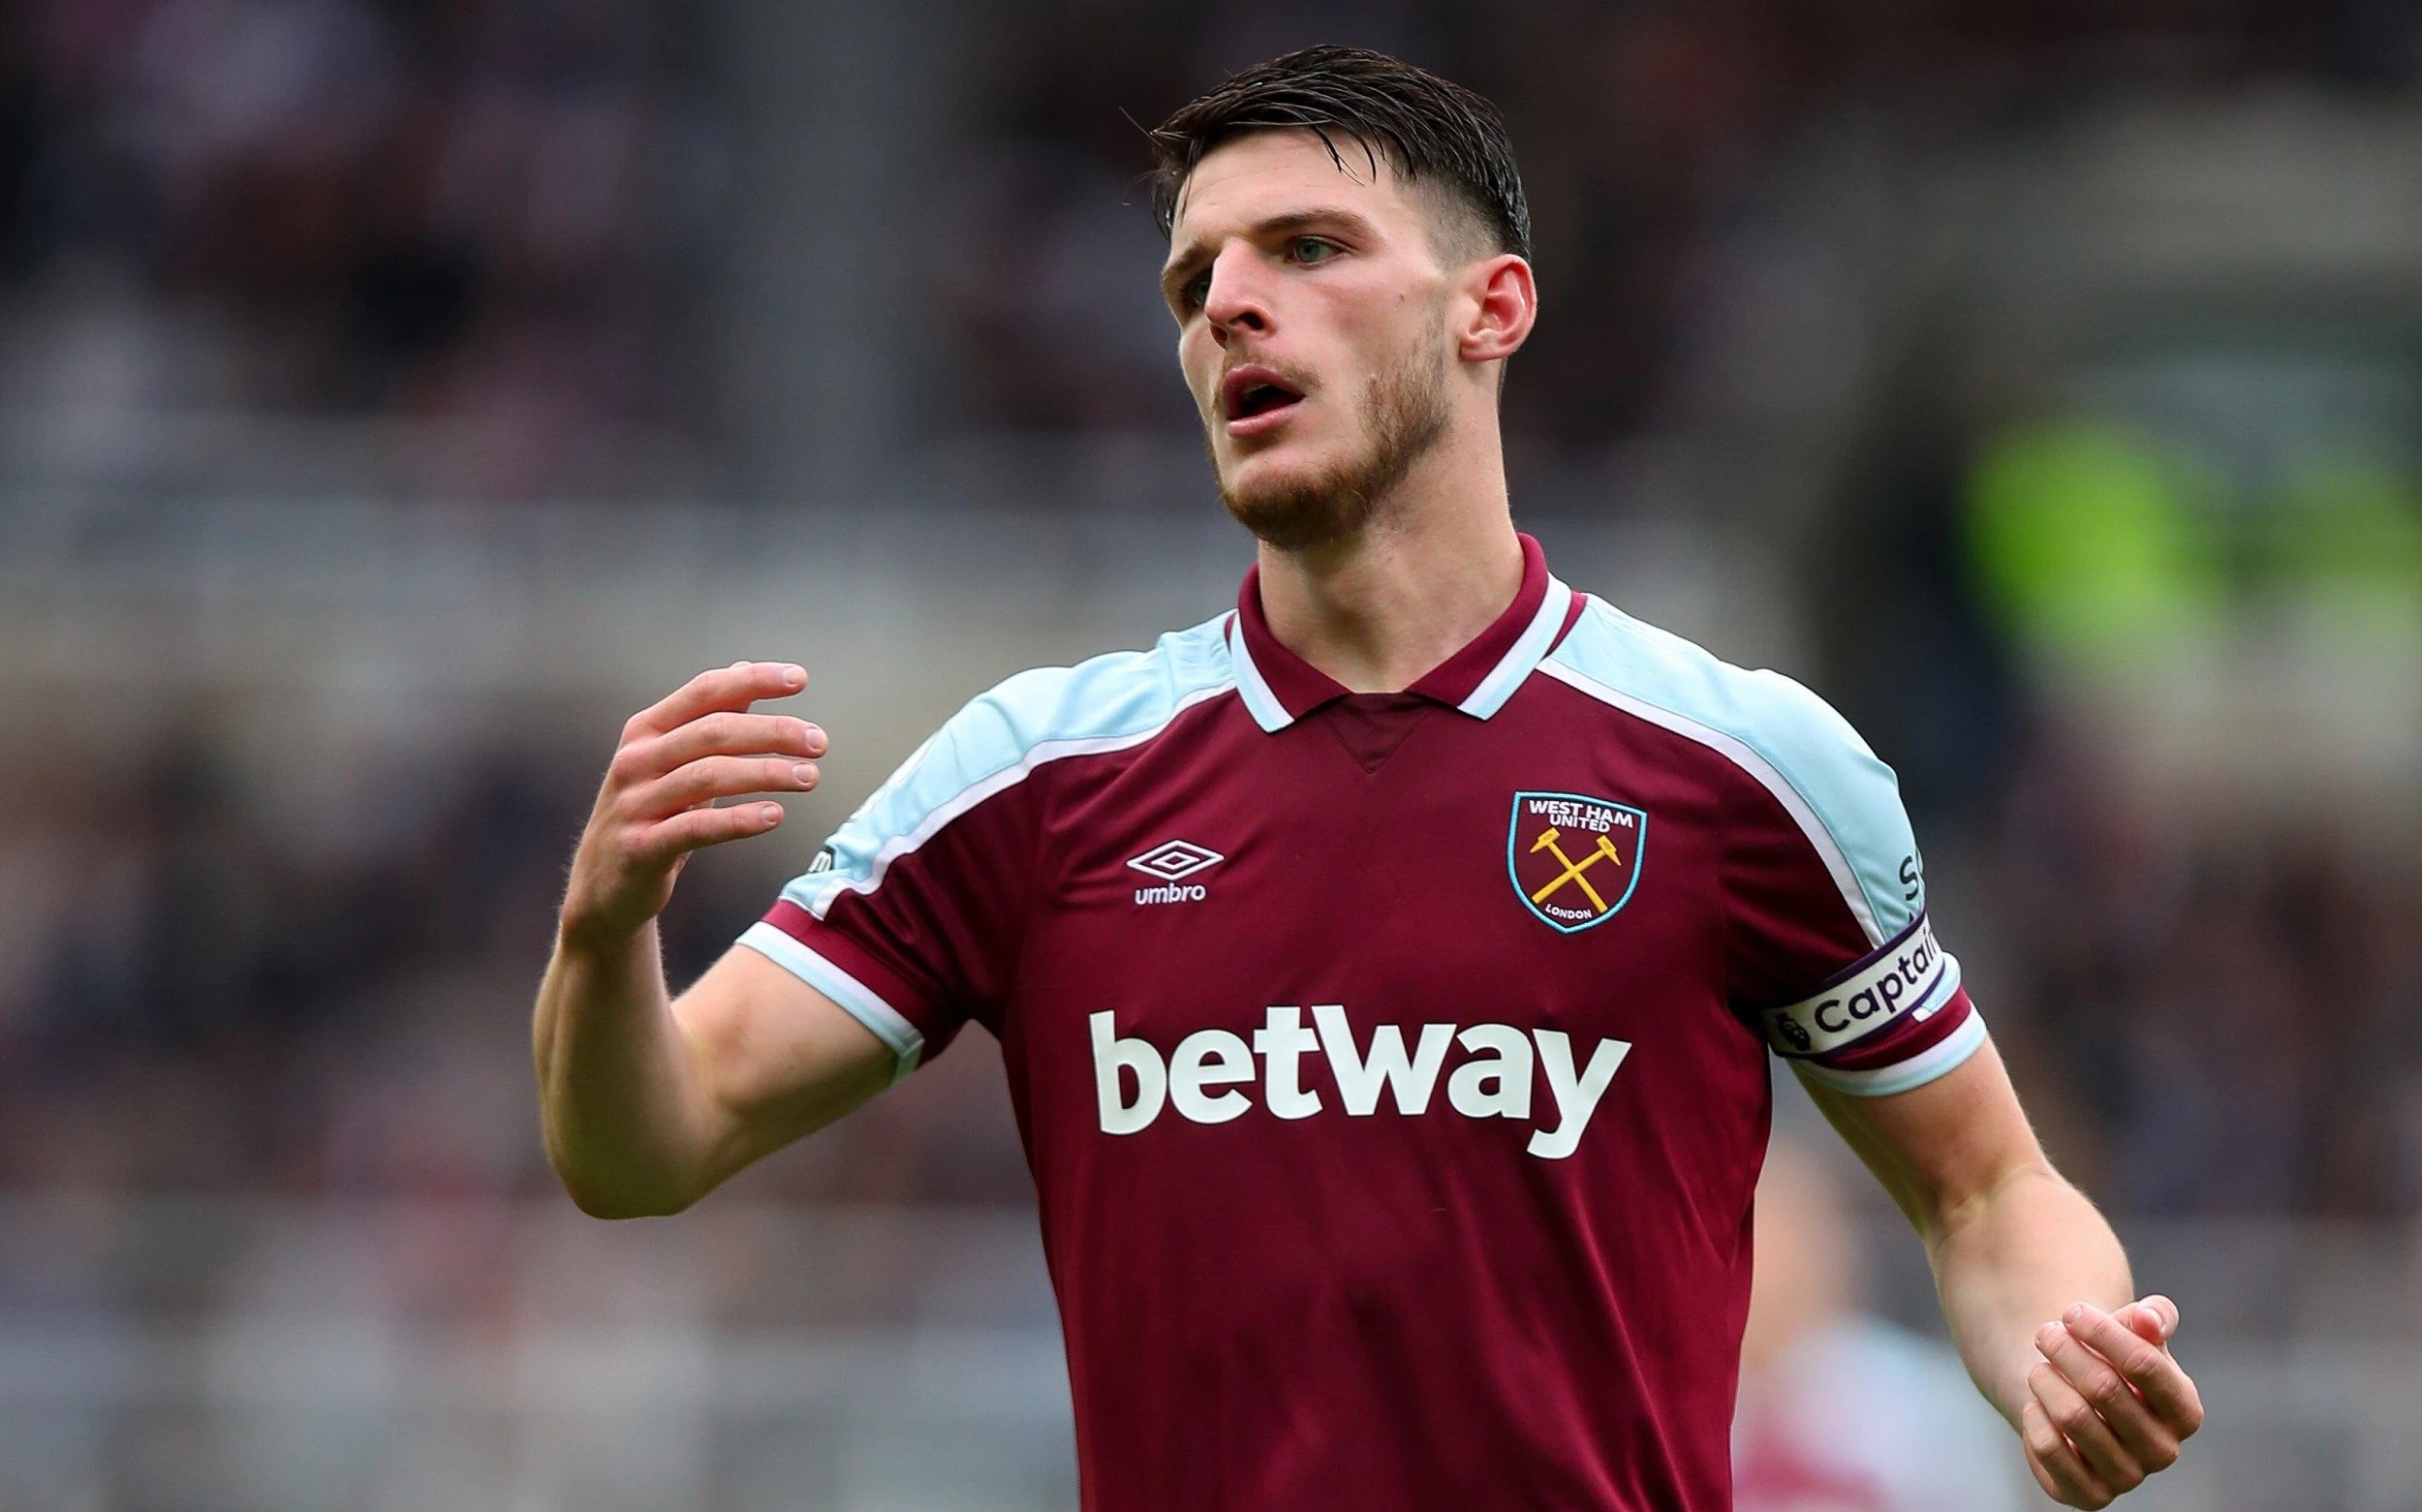 Premier League: West Ham midfielder Declan Rice receives two-game BAN in Europe after accusing a referee of 'CORRUPTION' - Reports